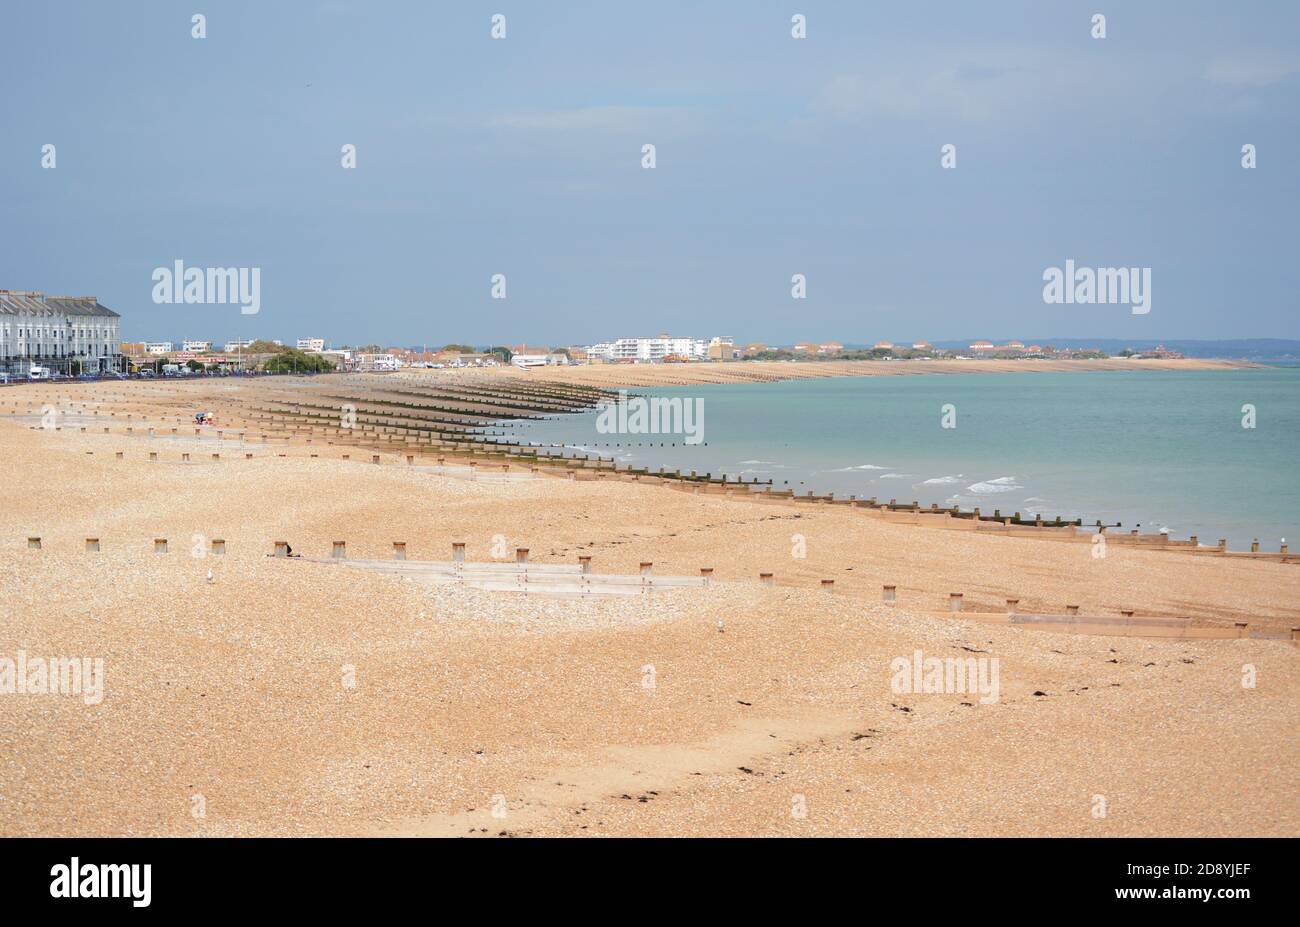 Eastbourne shingle beach in East Sussex, almost deserted on a sunny summer day. Hotels, houses and businesses line the edge of the beach. Stock Photo